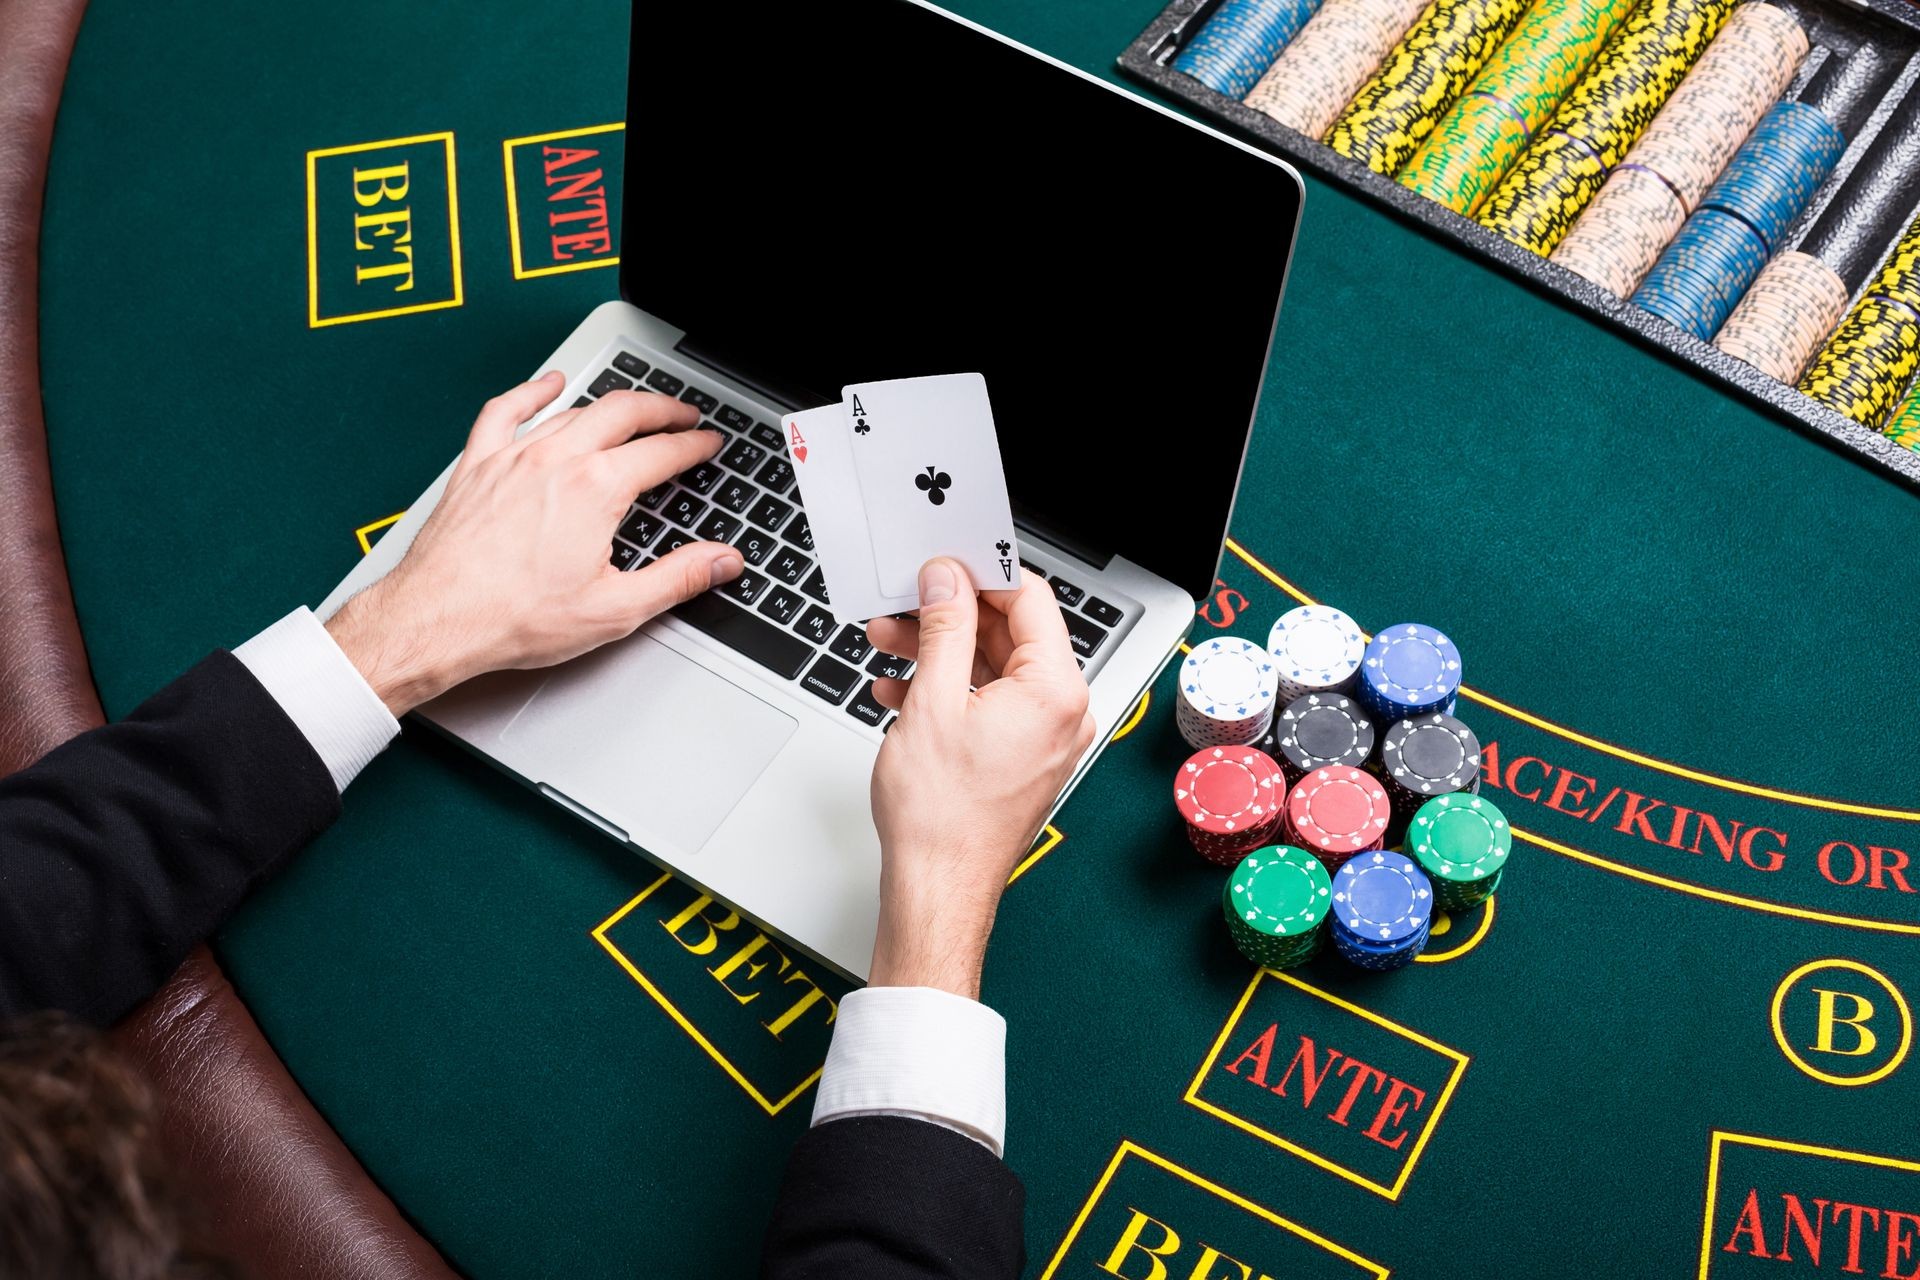 casino, online gambling, technology and people concept - close up of poker player with playing cards